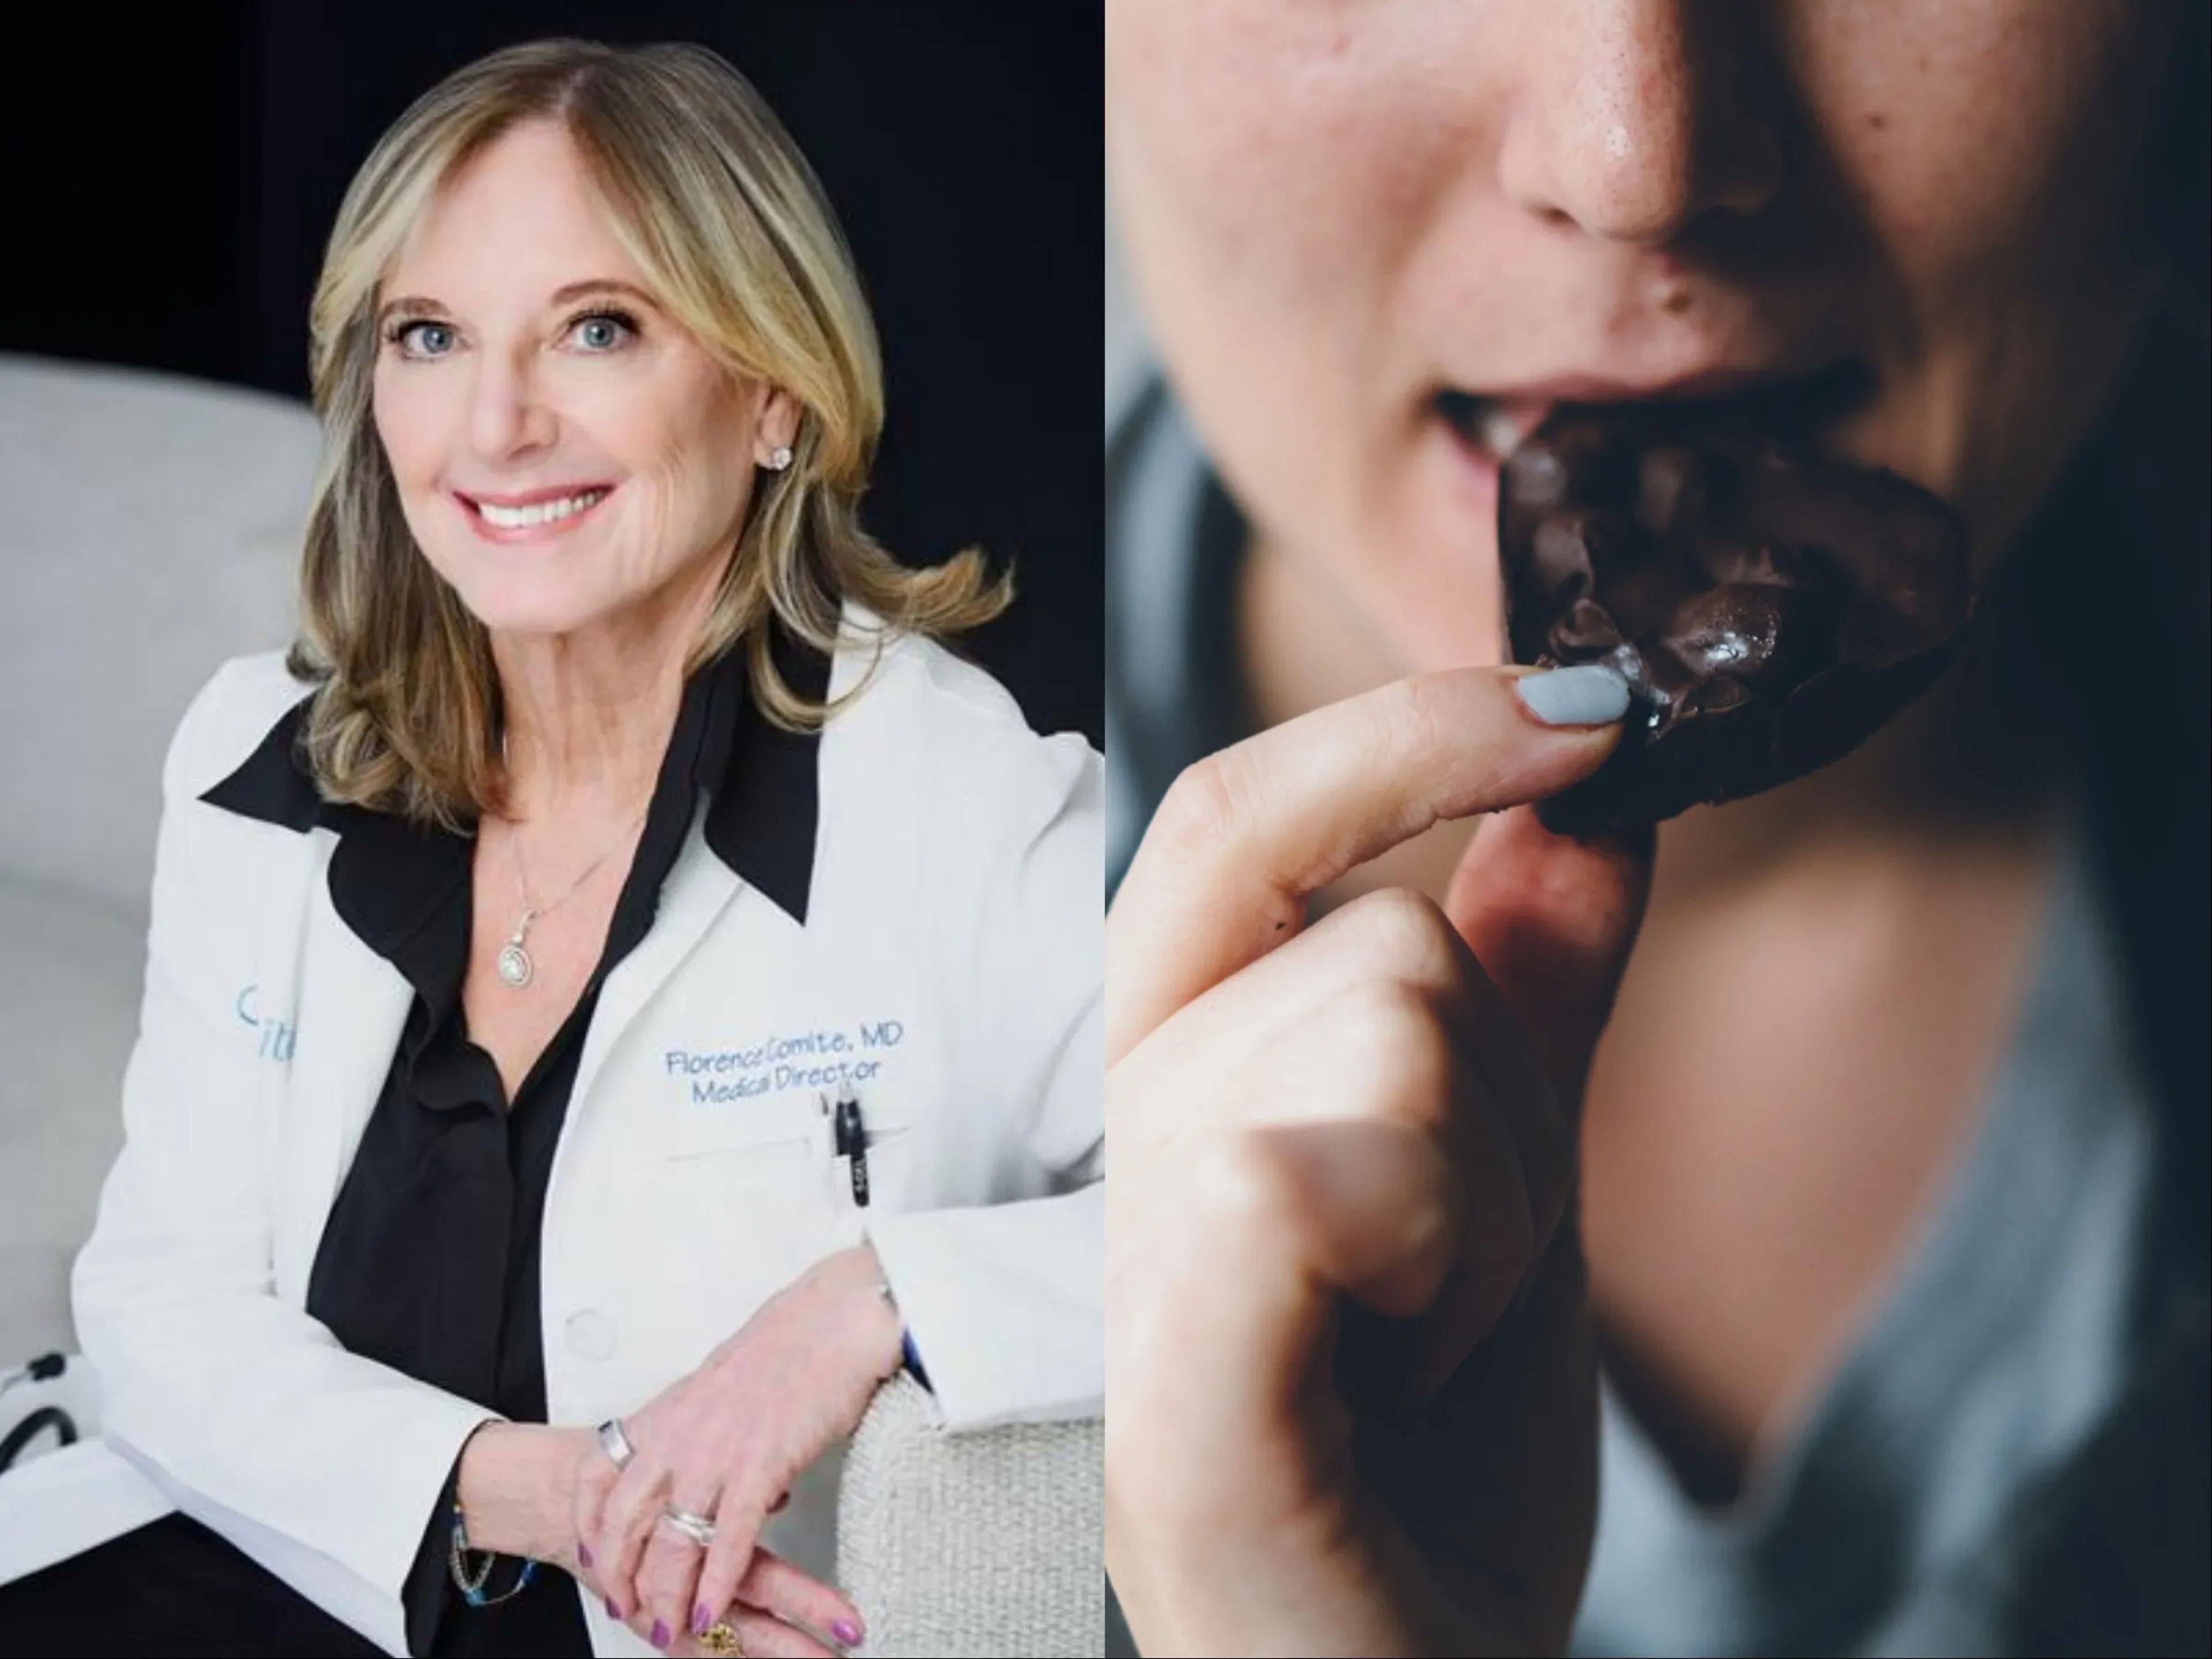 A woman eating dark chocolate; Dr. Florence Comite's headshot